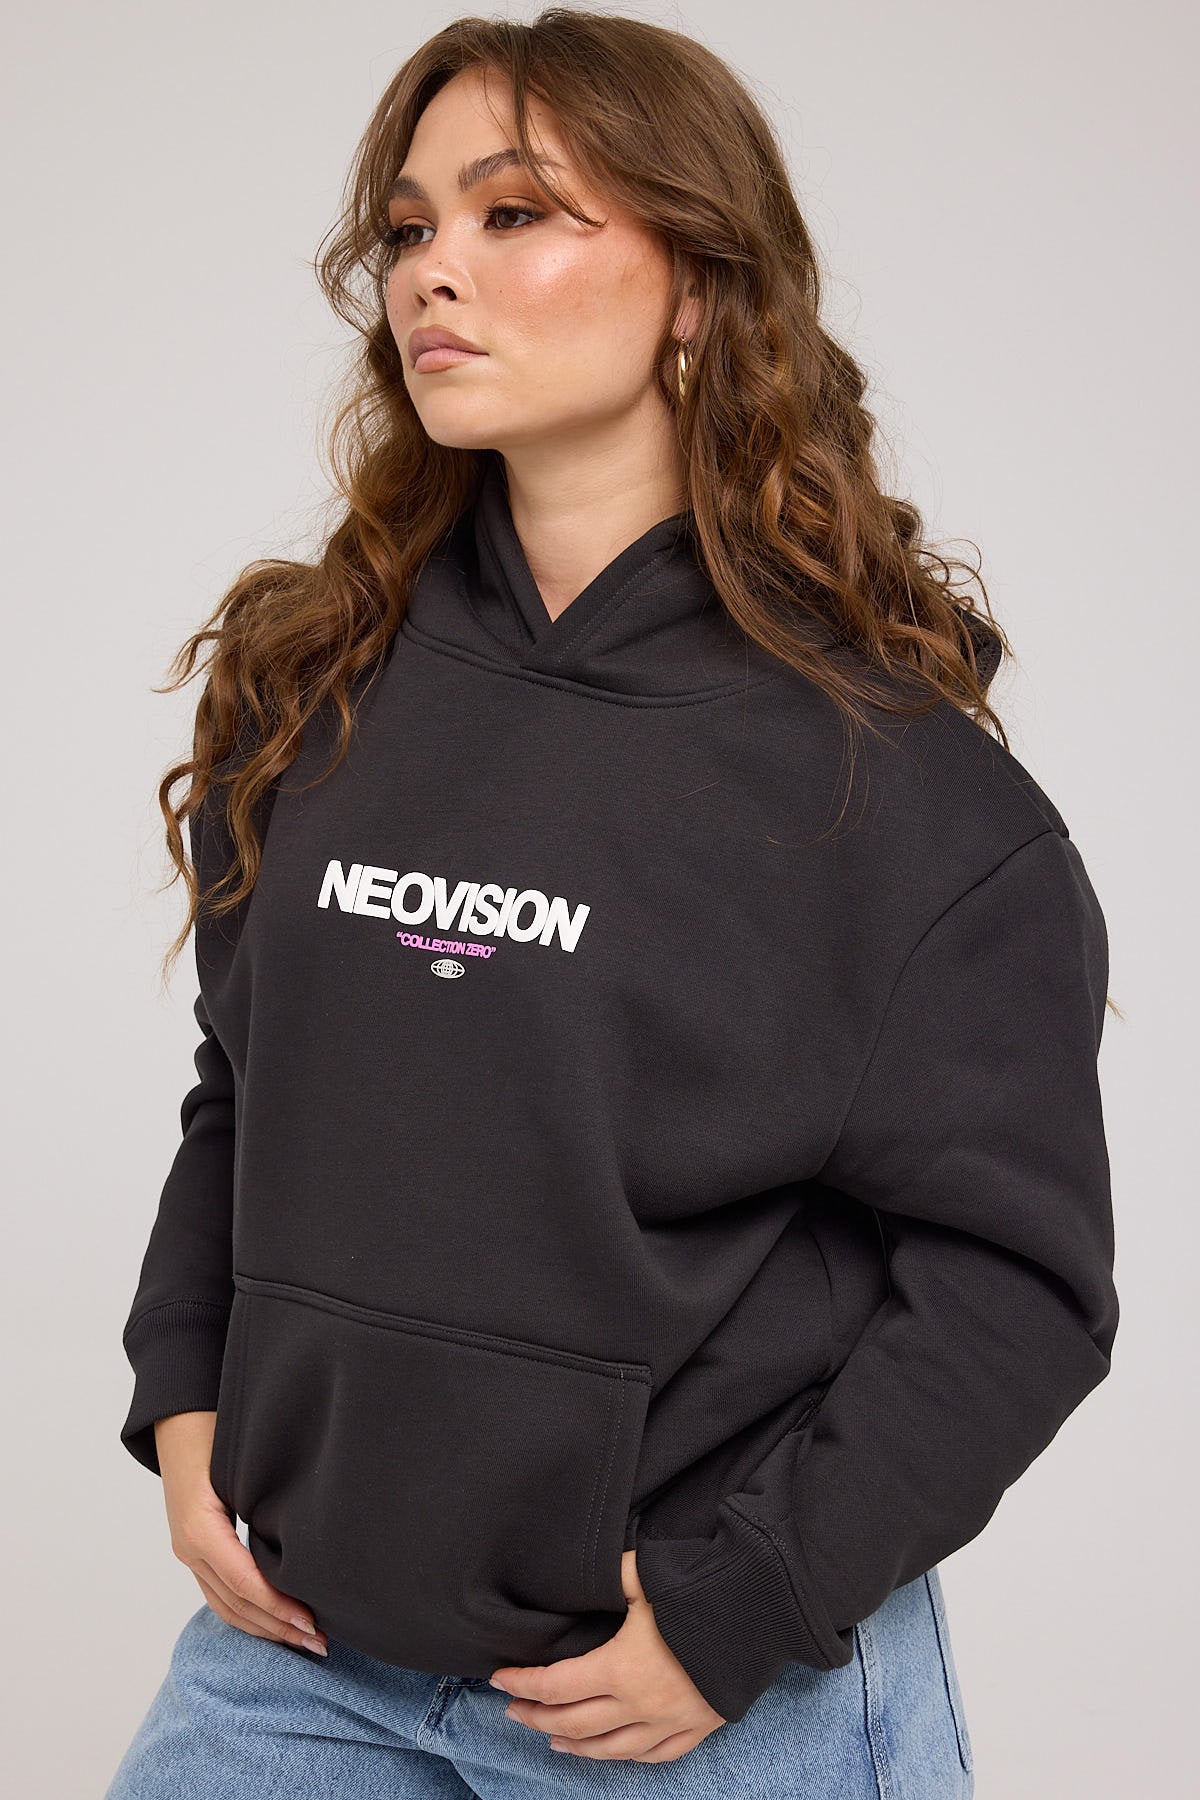 Neovision Exhibit Relaxed Hoodie Black